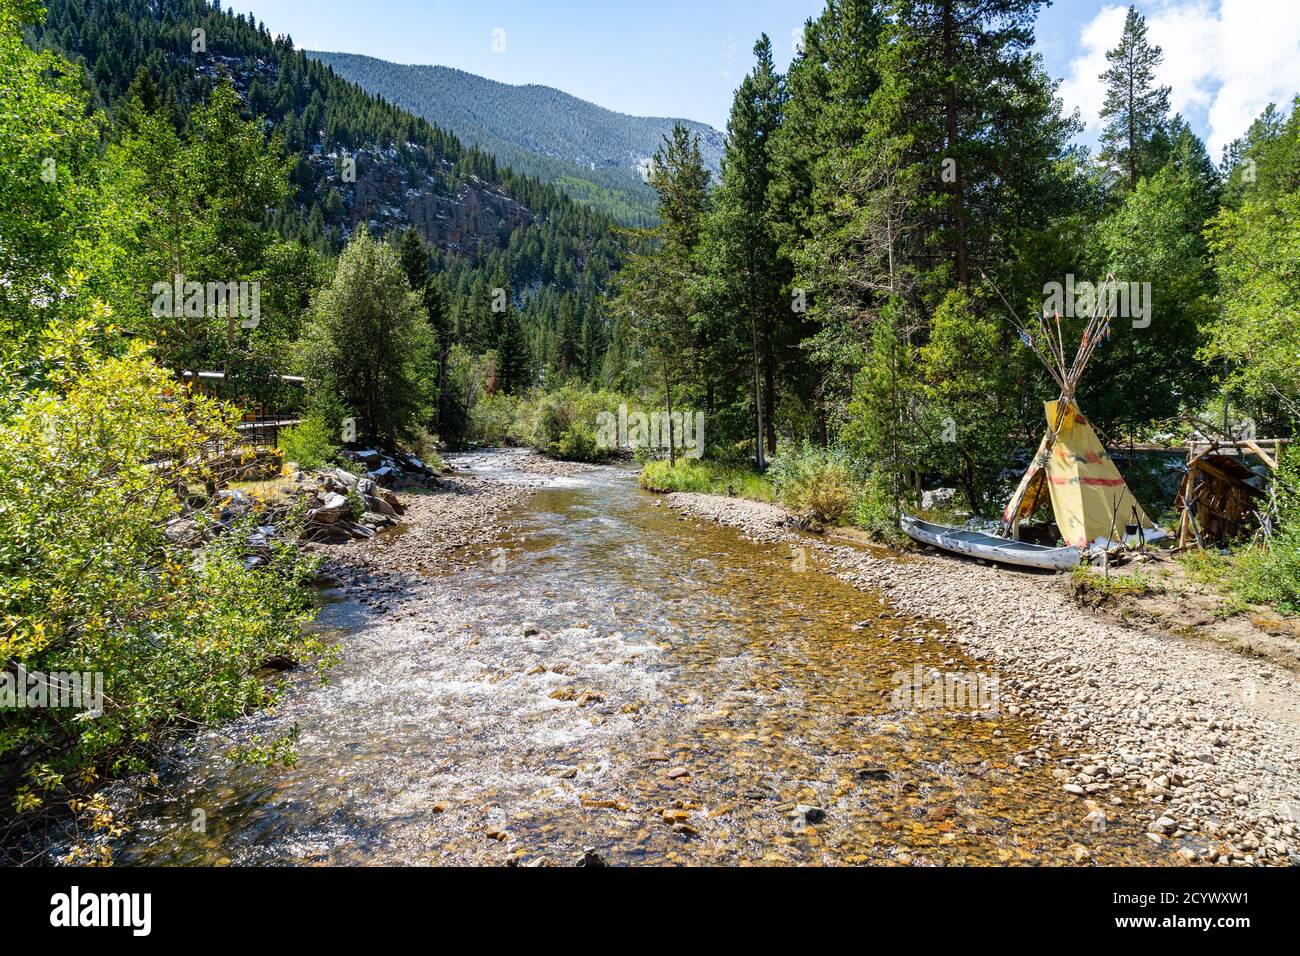 A small teepee and empty canoe sit by a small Colorado creek i Stock Photo